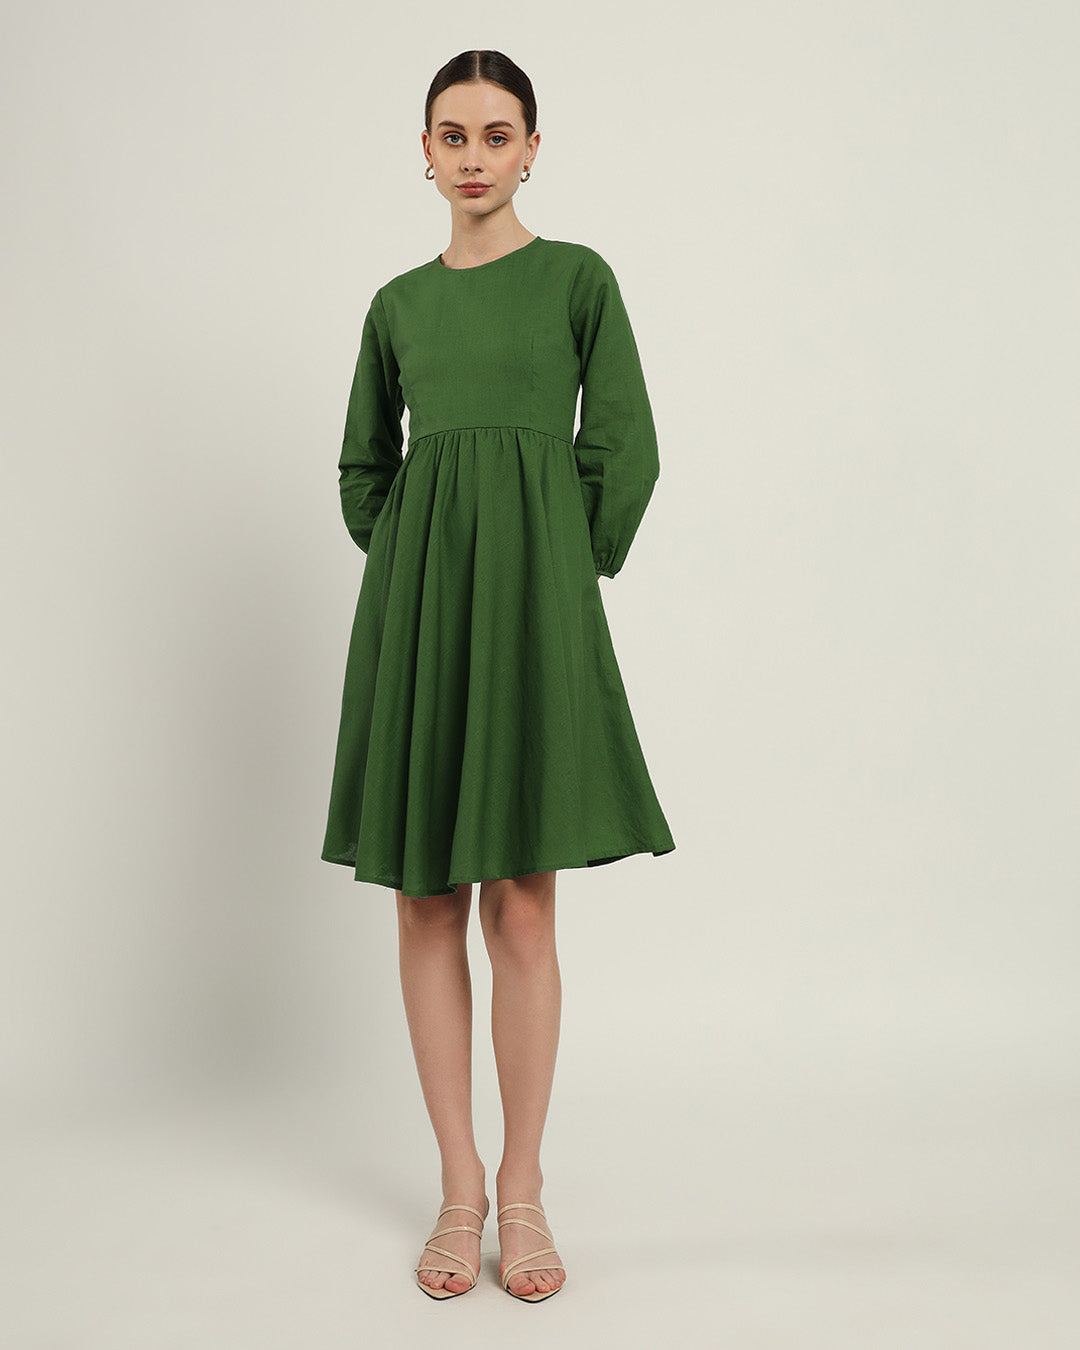 The Exeter Emerald Cotton Dress